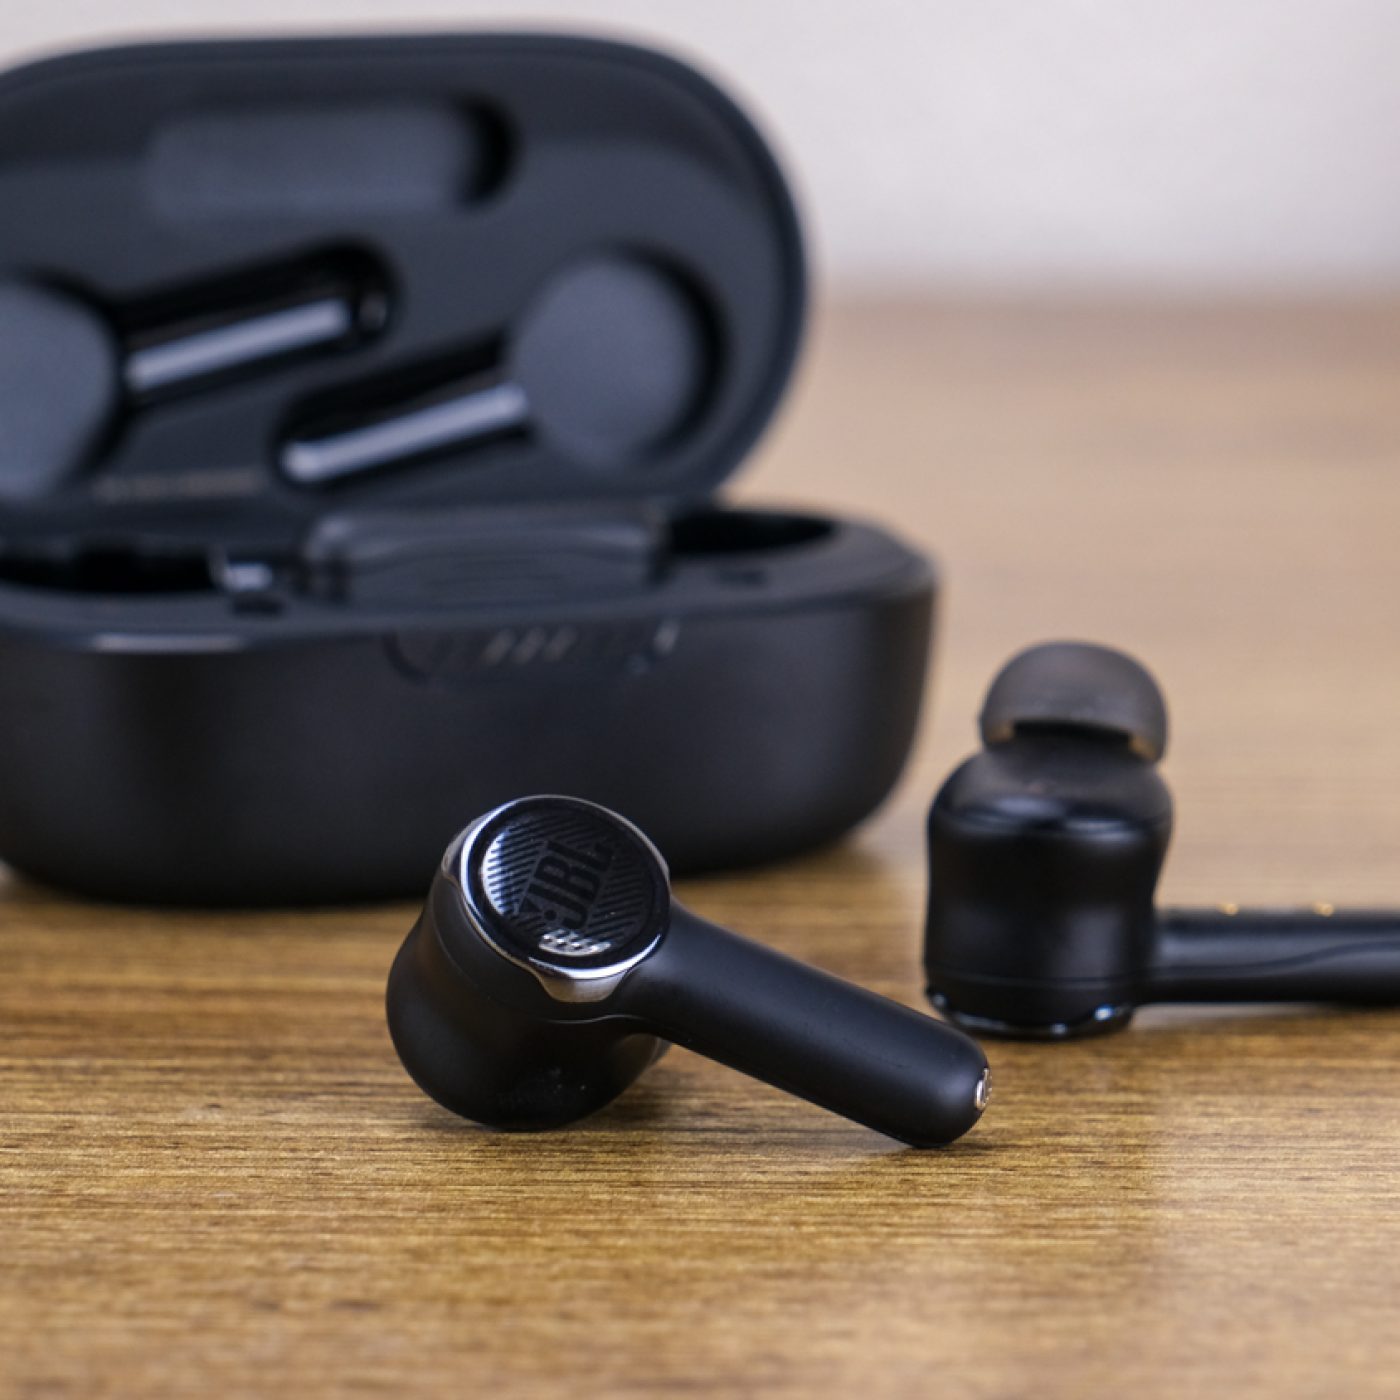 JBL Quantum TWS wireless earbuds review: Great earbuds for gamers on the go